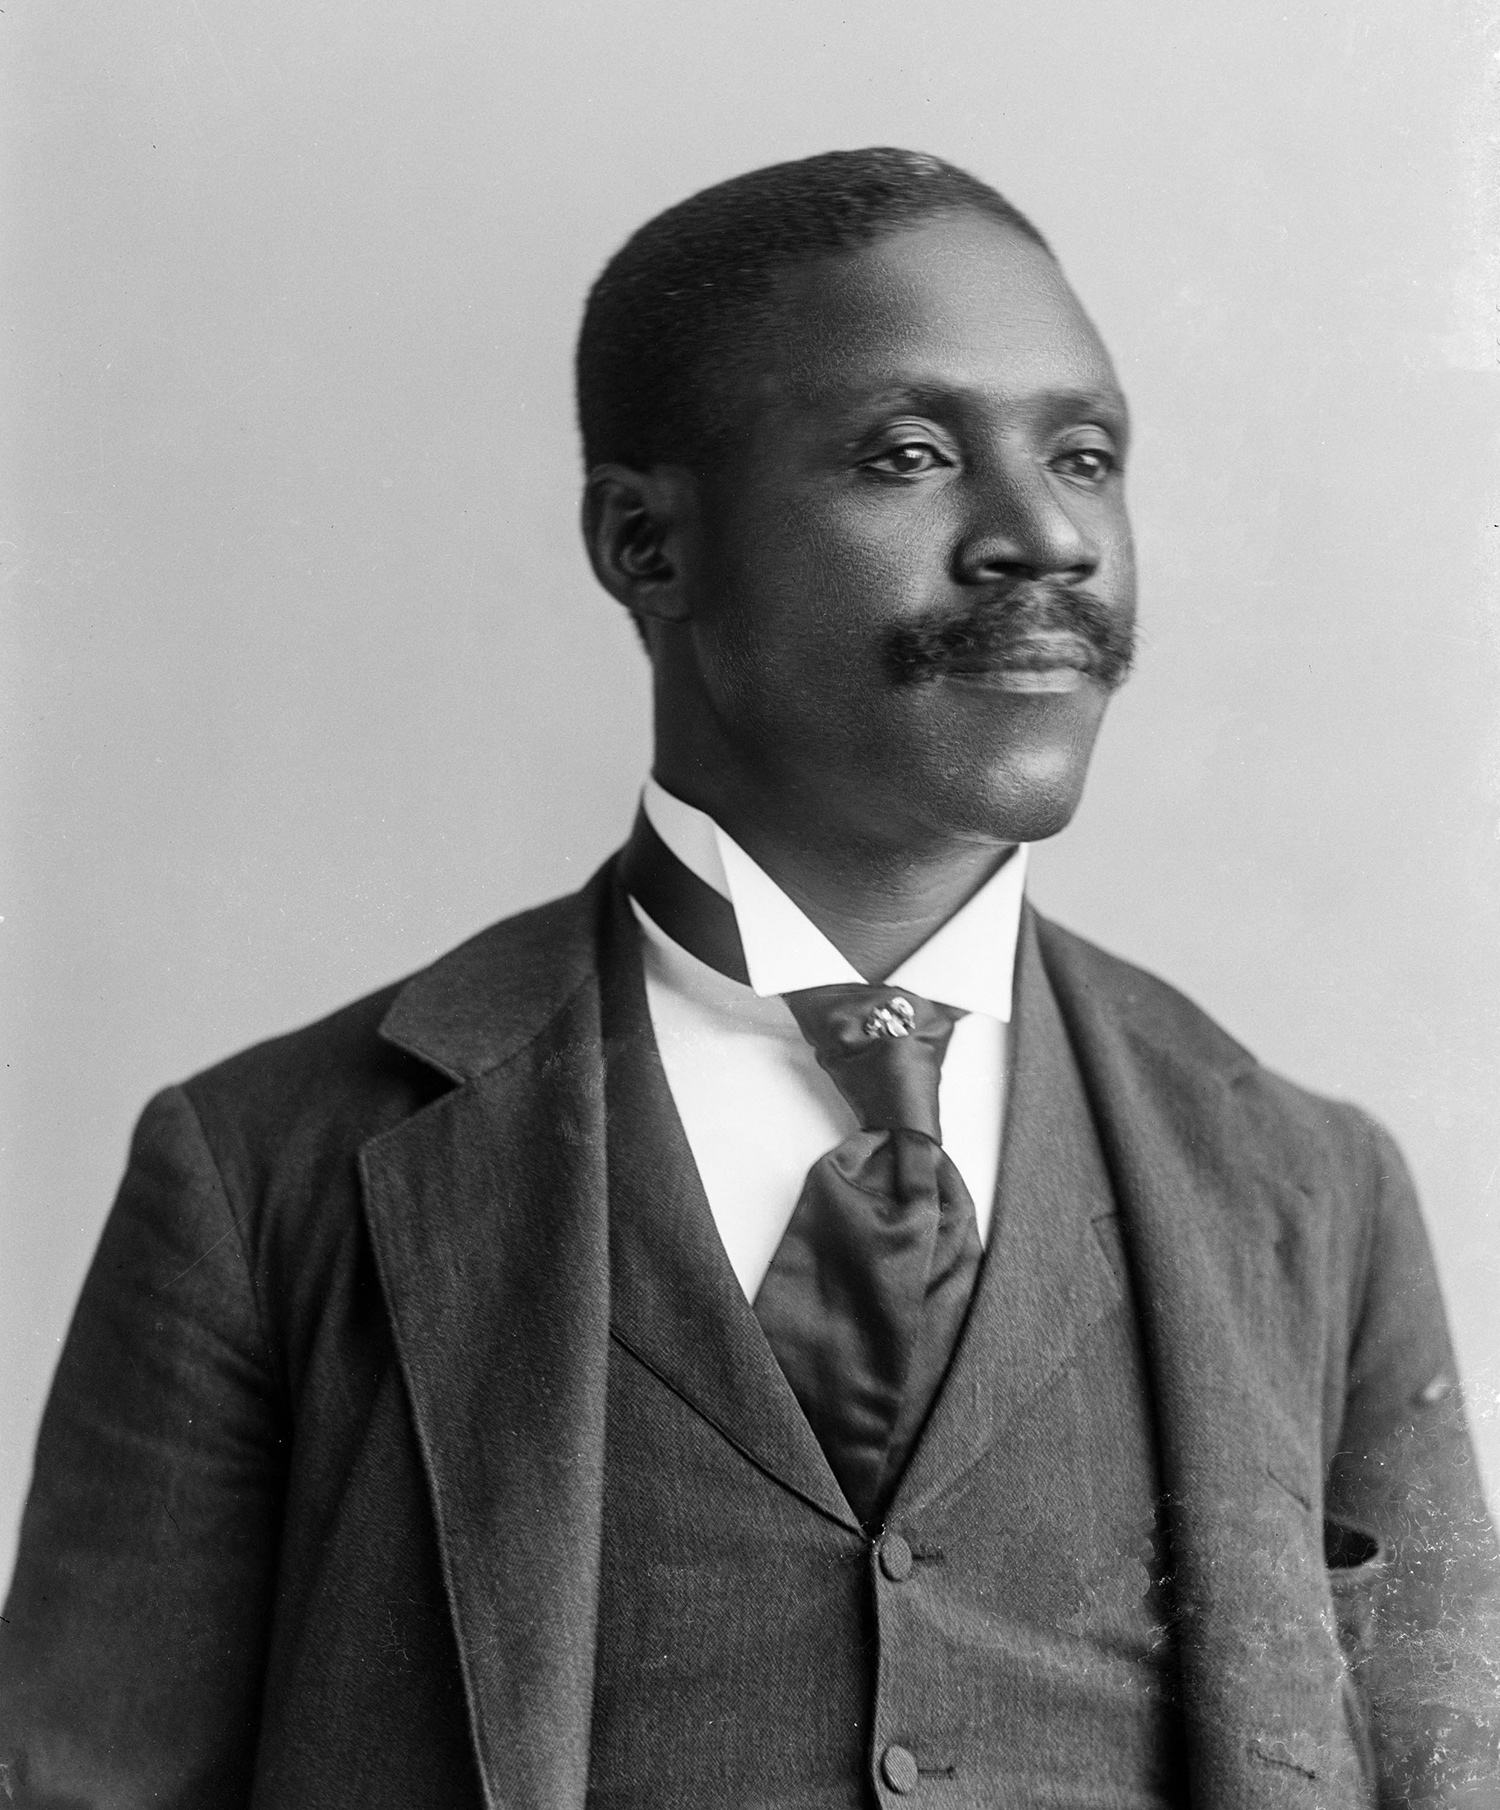 Black and white portrait photo of George Washington Murray, an African American man, wearing a three-piece suit 